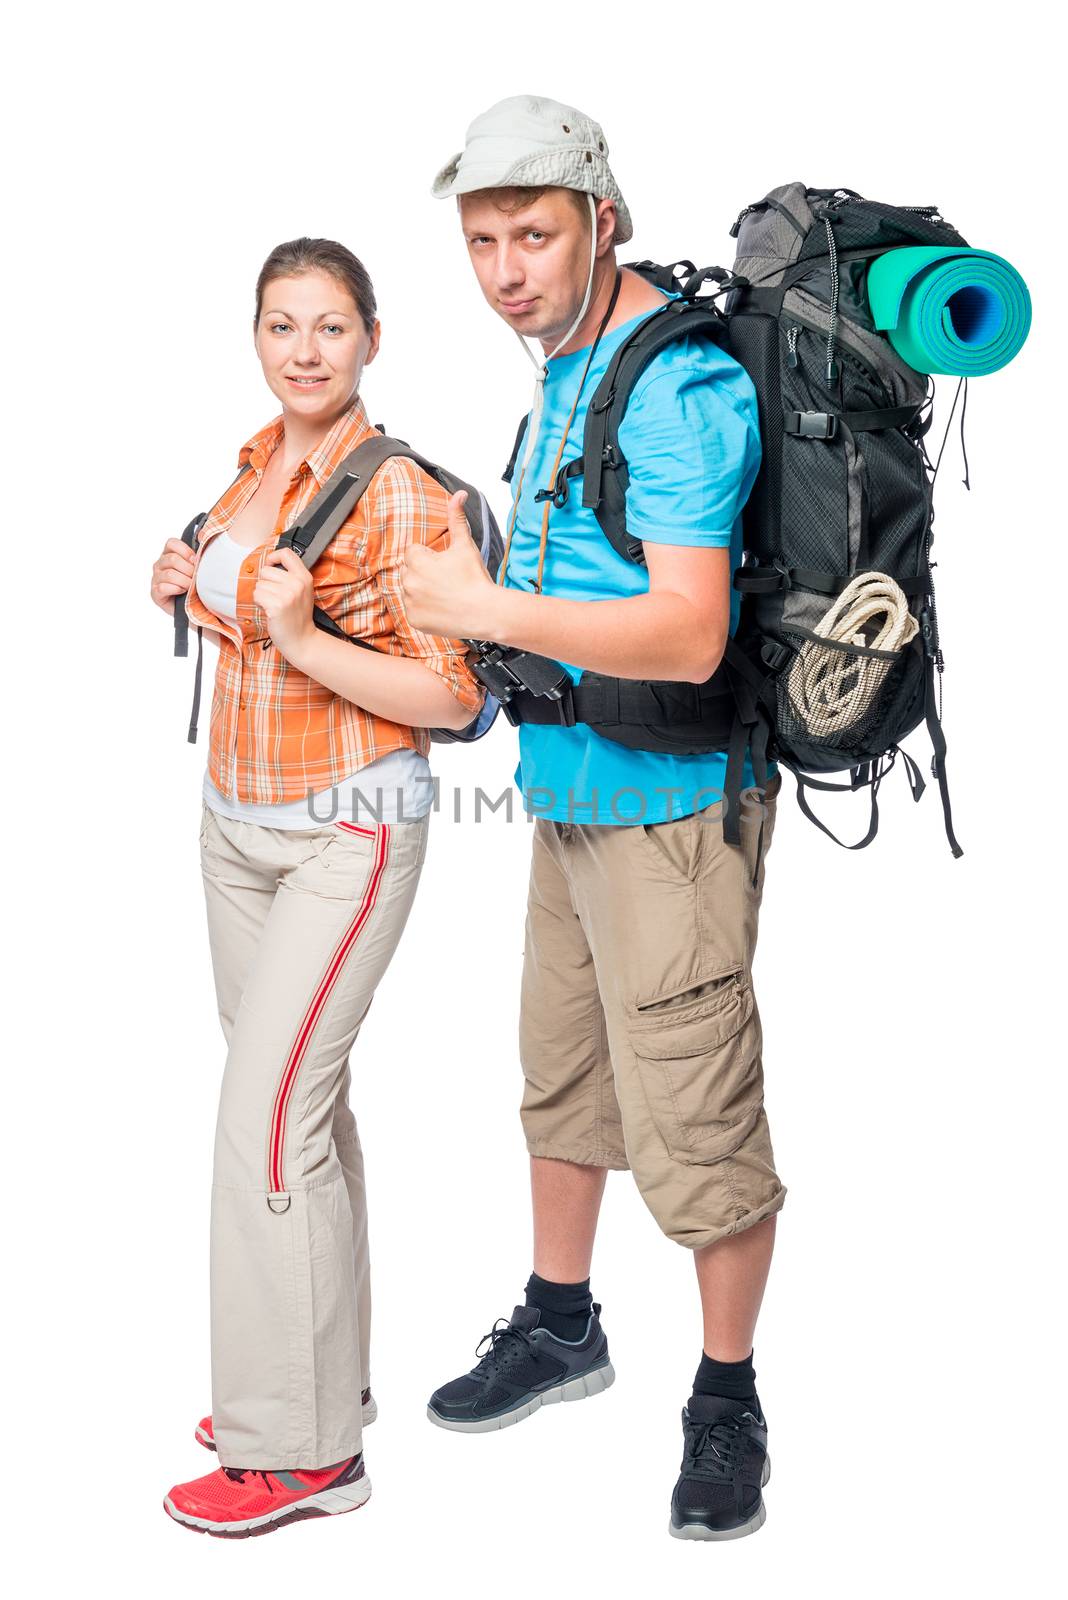 Tourist satisfaction with backpacks posing in the studio on a white background